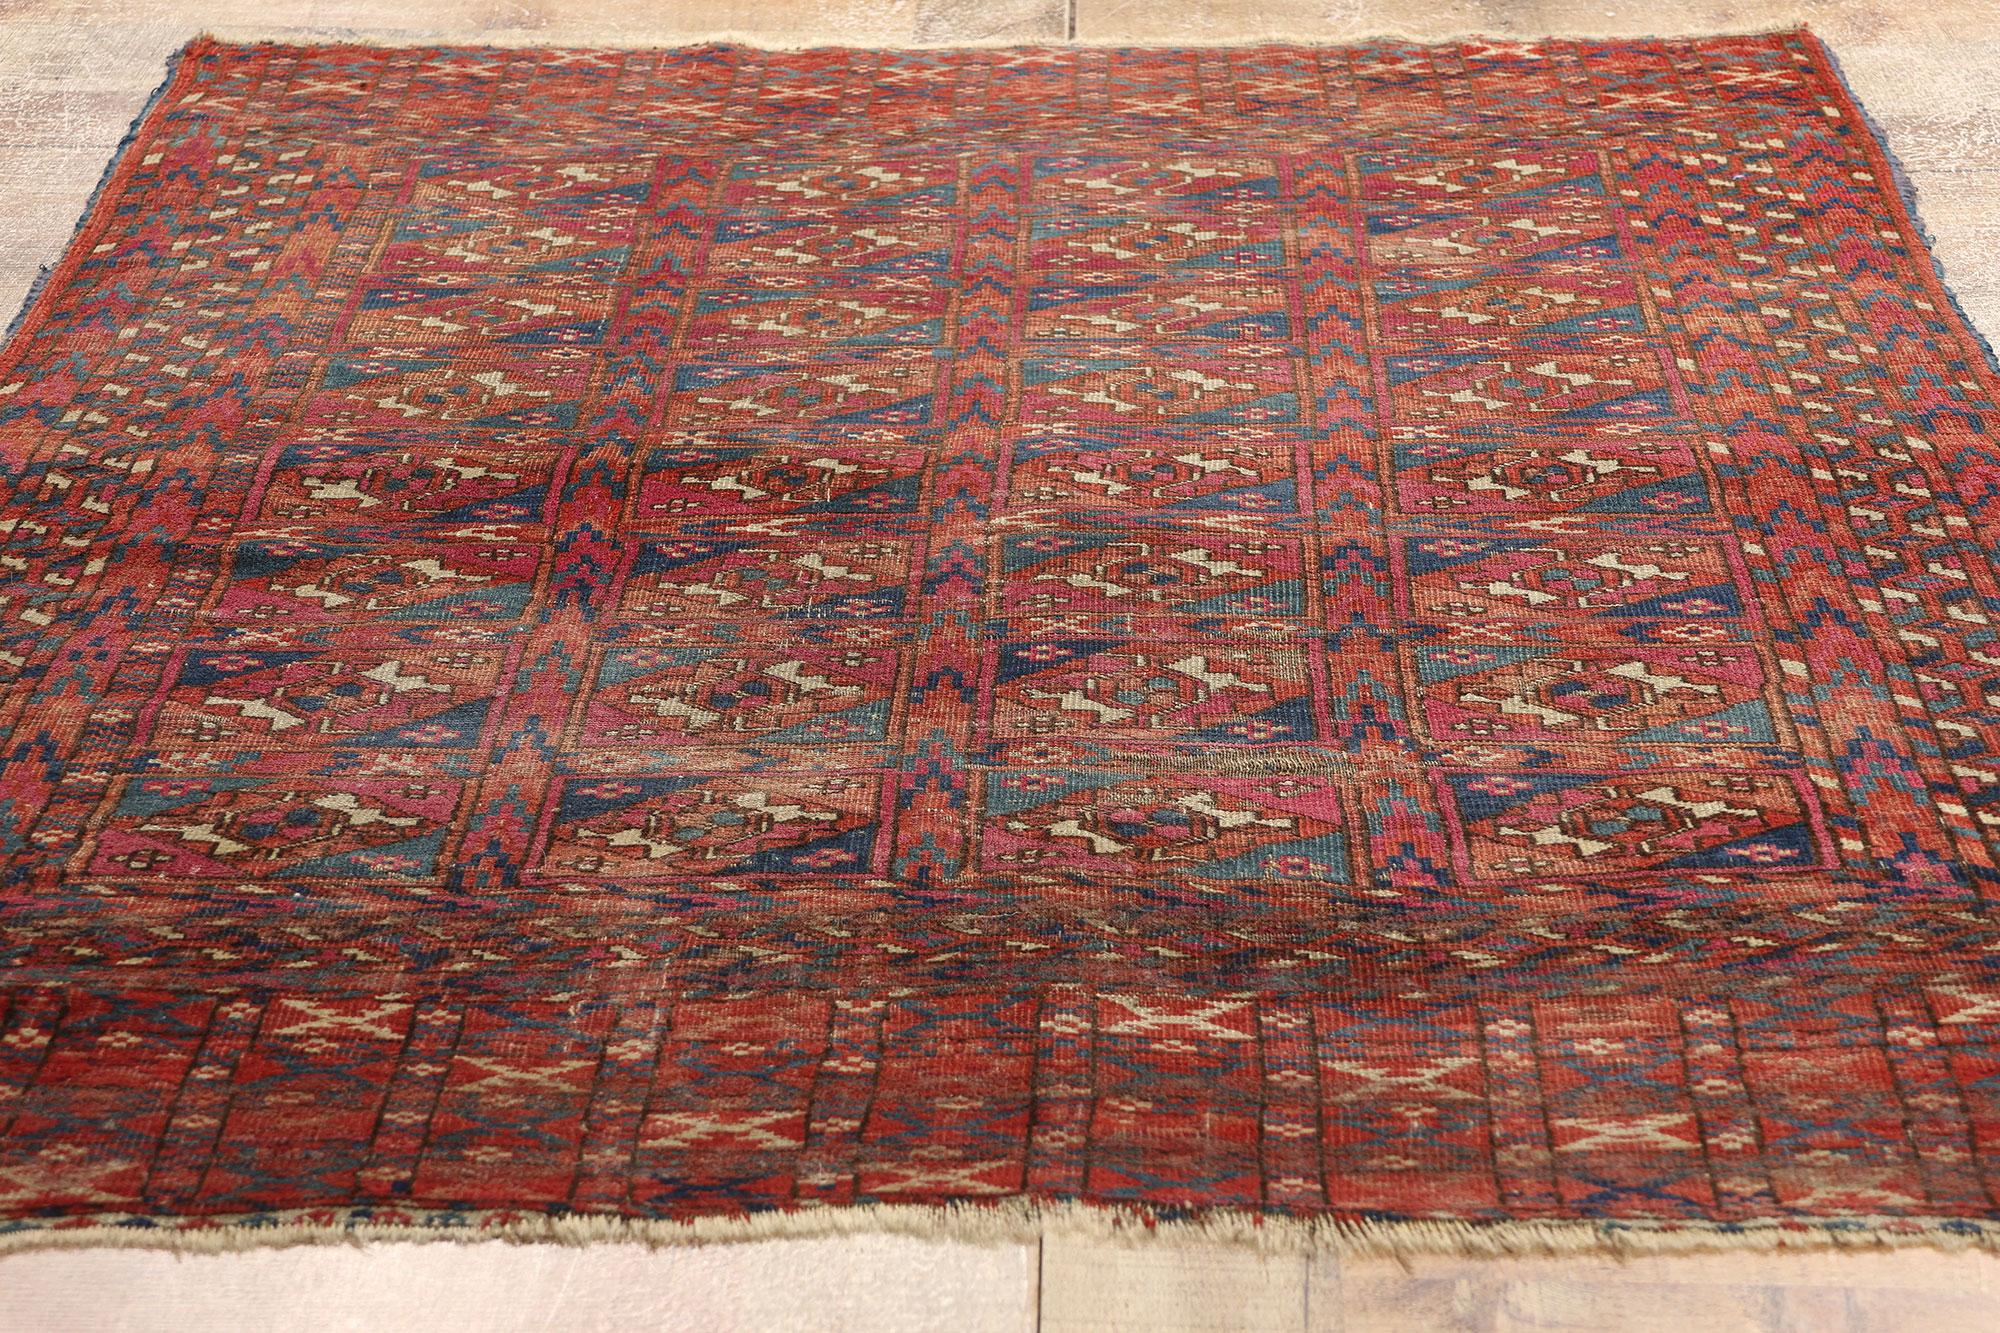 Late 19th Century Distressed Antique Turkoman Tribe Chuval Tekke Tribal Carpet  For Sale 2